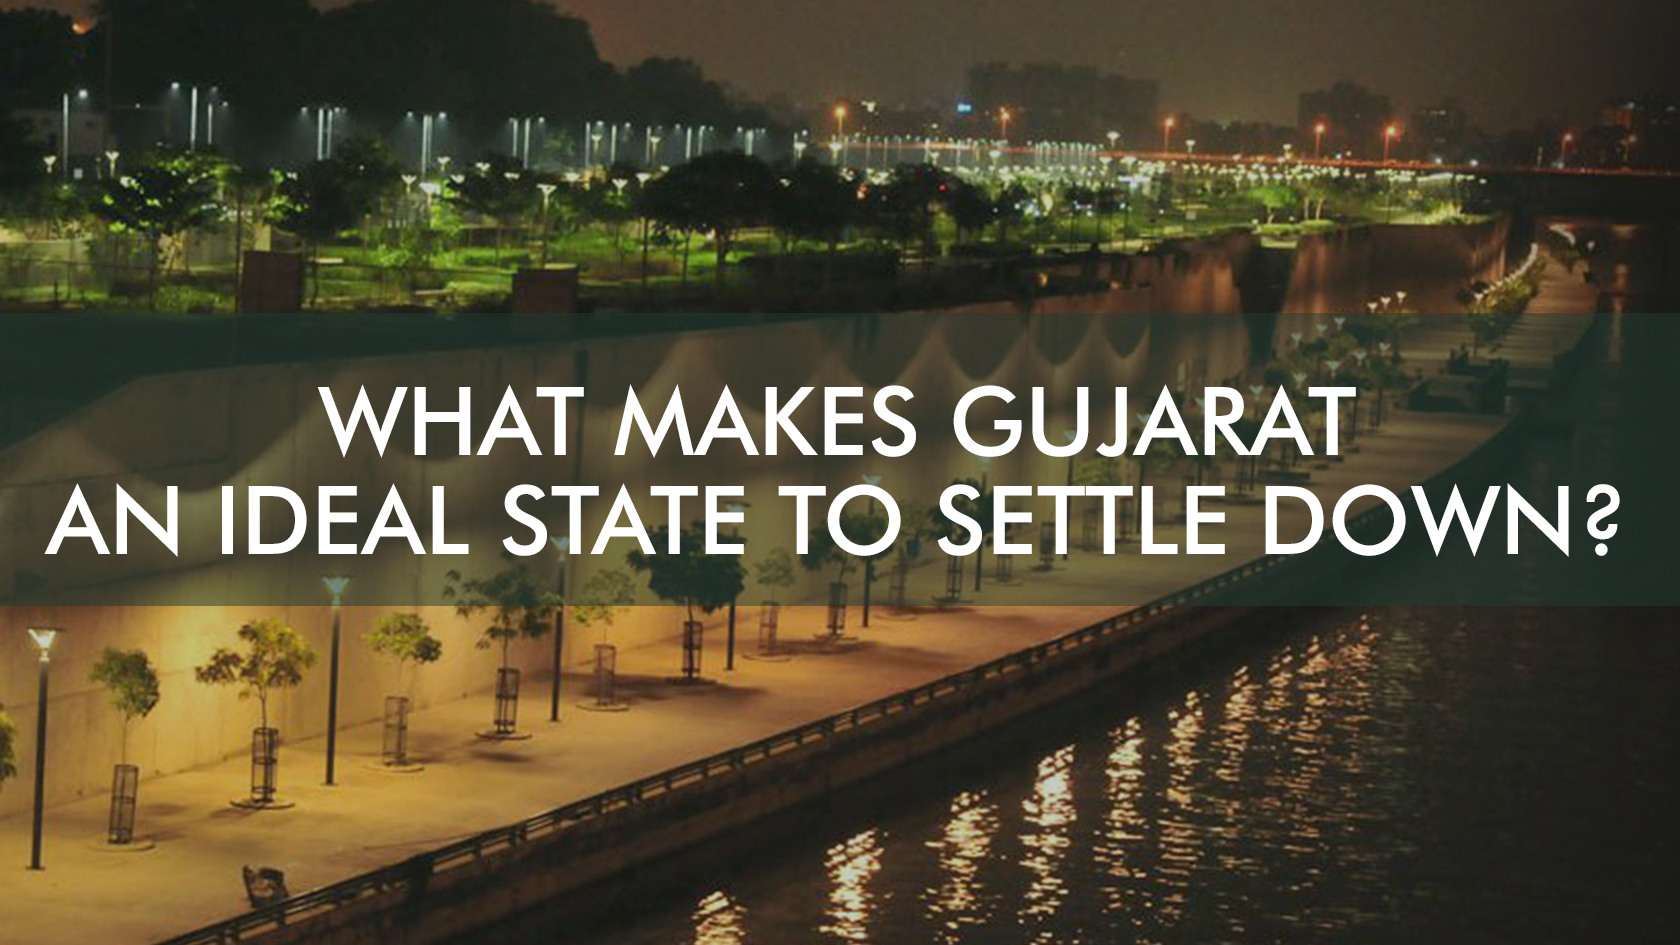 What makes Gujarat an ideal state to settle down?